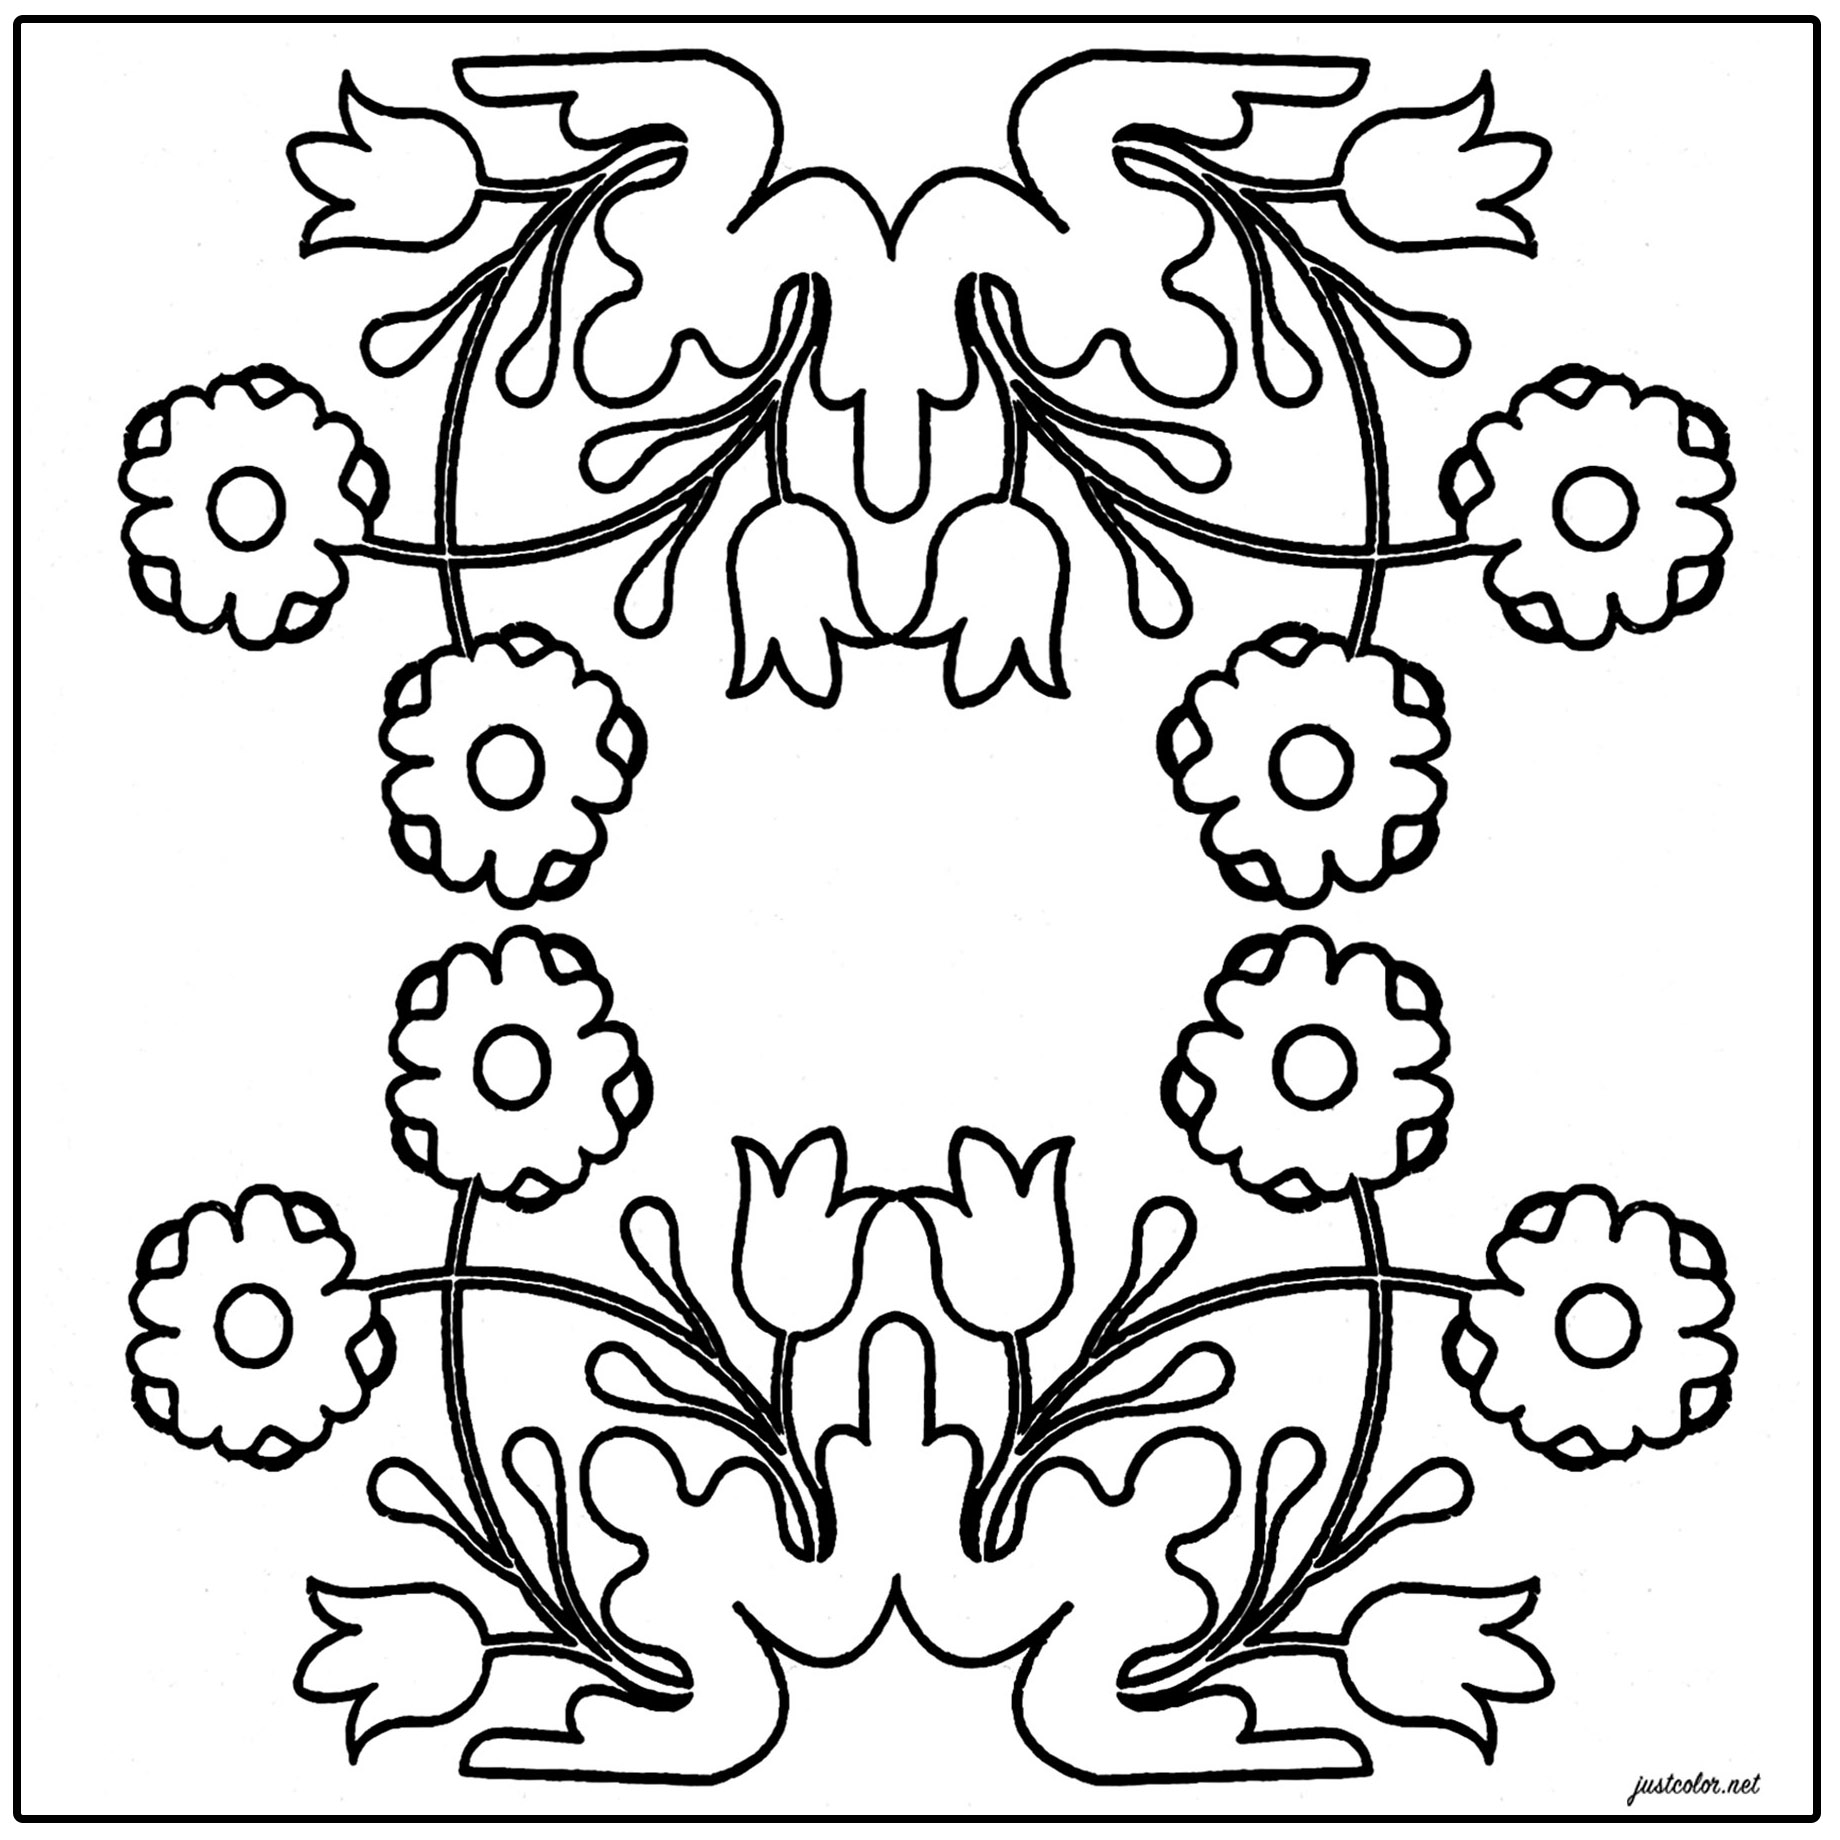 Simple azulejo with a few flowers. Beautiful flowers, including small tulips, to color in this simple azulejo.